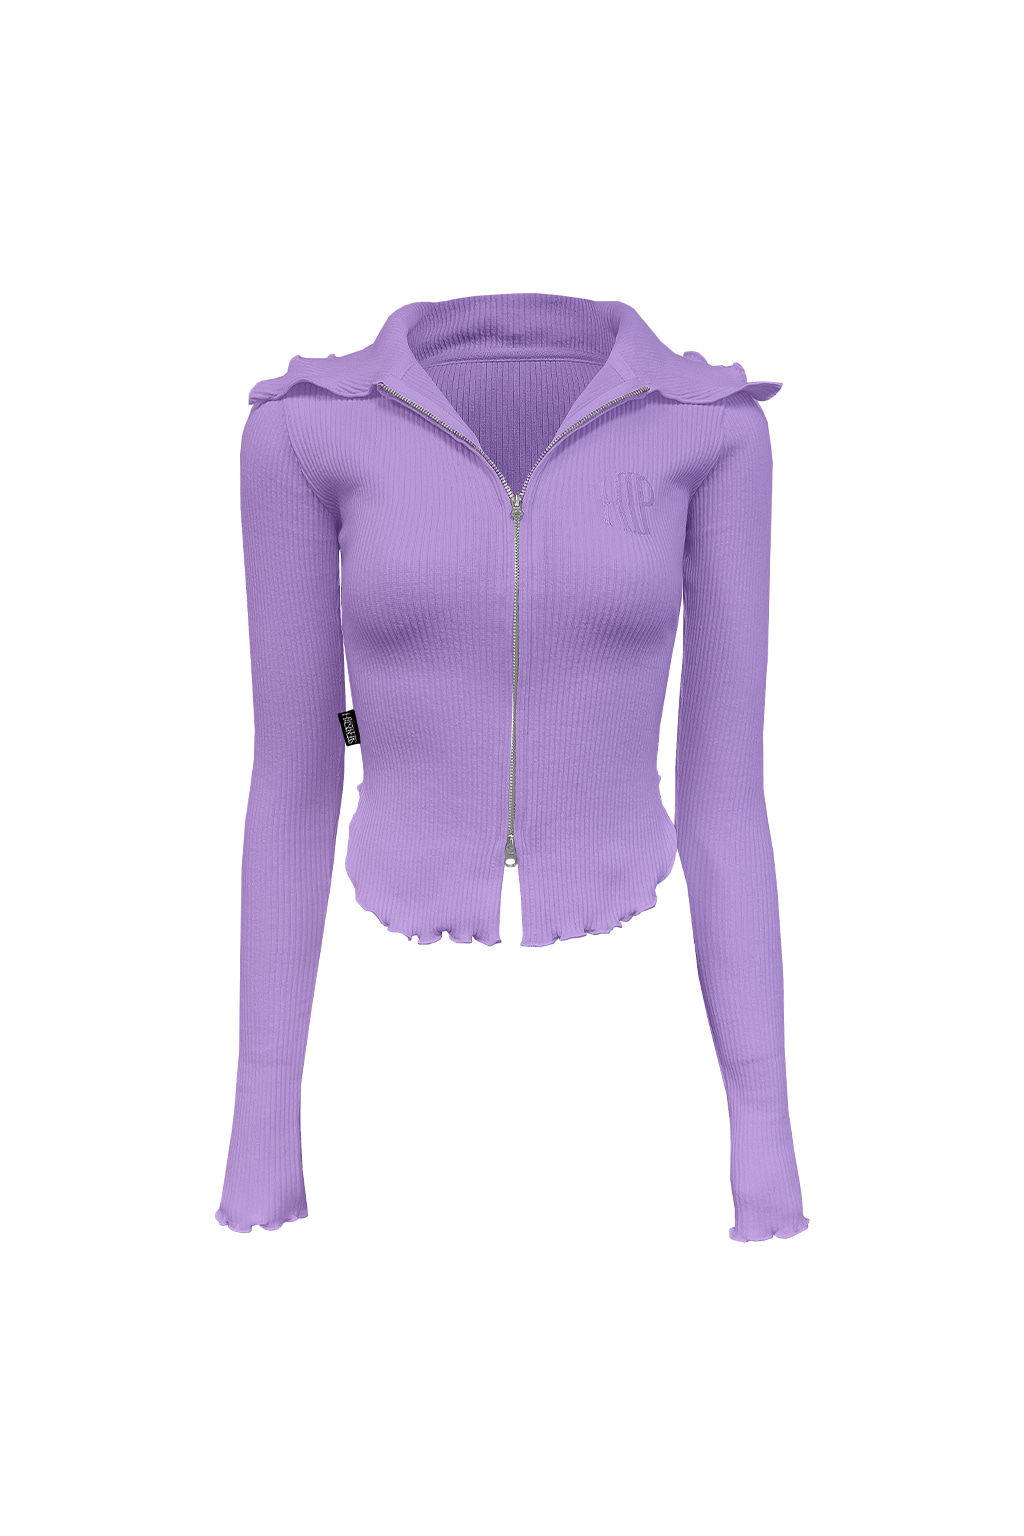 Ribbed Tension Two-Way Glamour Zip-Up Lavender